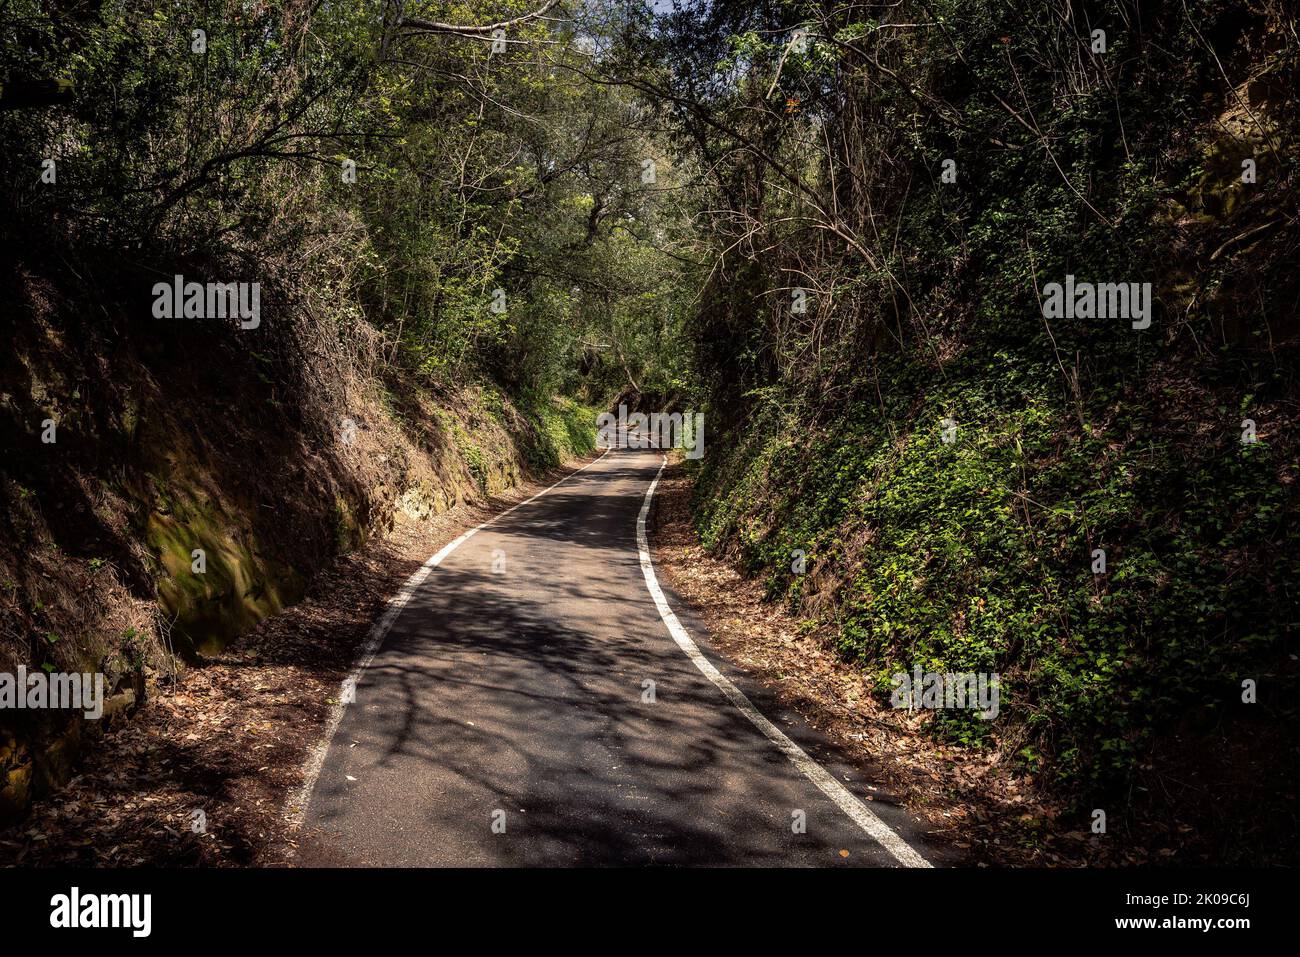 Narrow asphalt road going up from Pesaro to the San Bartolo Mount, under a roof of trees Stock Photo